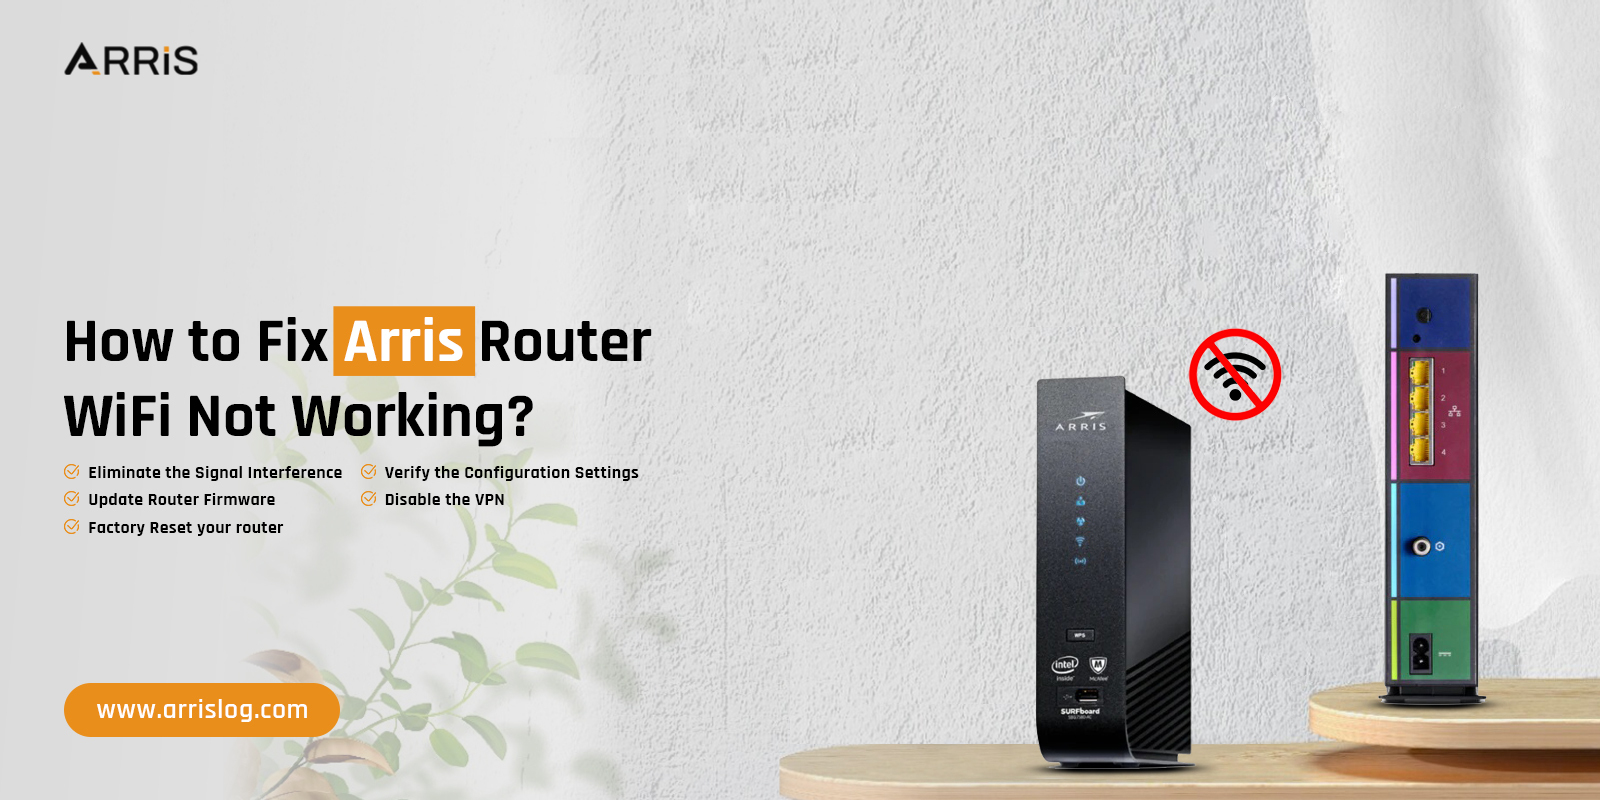 Arris Router WiFi Not Working